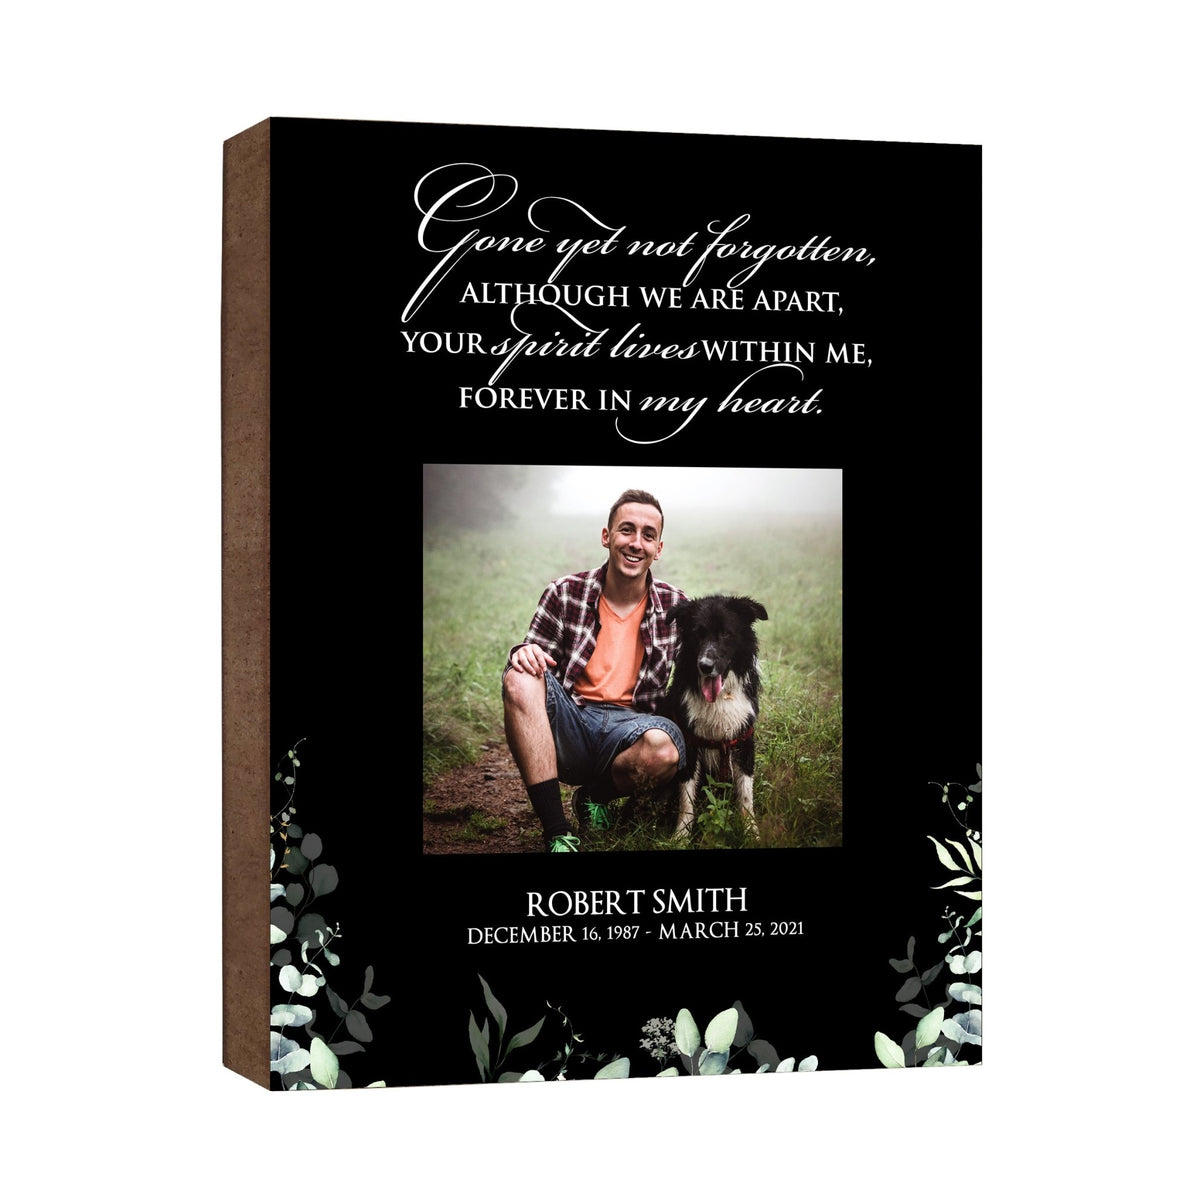 Personalized Human Memorial Black Photo &amp; Inspirational Verse Bereavement Wall Décor &amp; Sympathy Gift Ideas - Gone Yet Not Forgotten - LifeSong Milestones